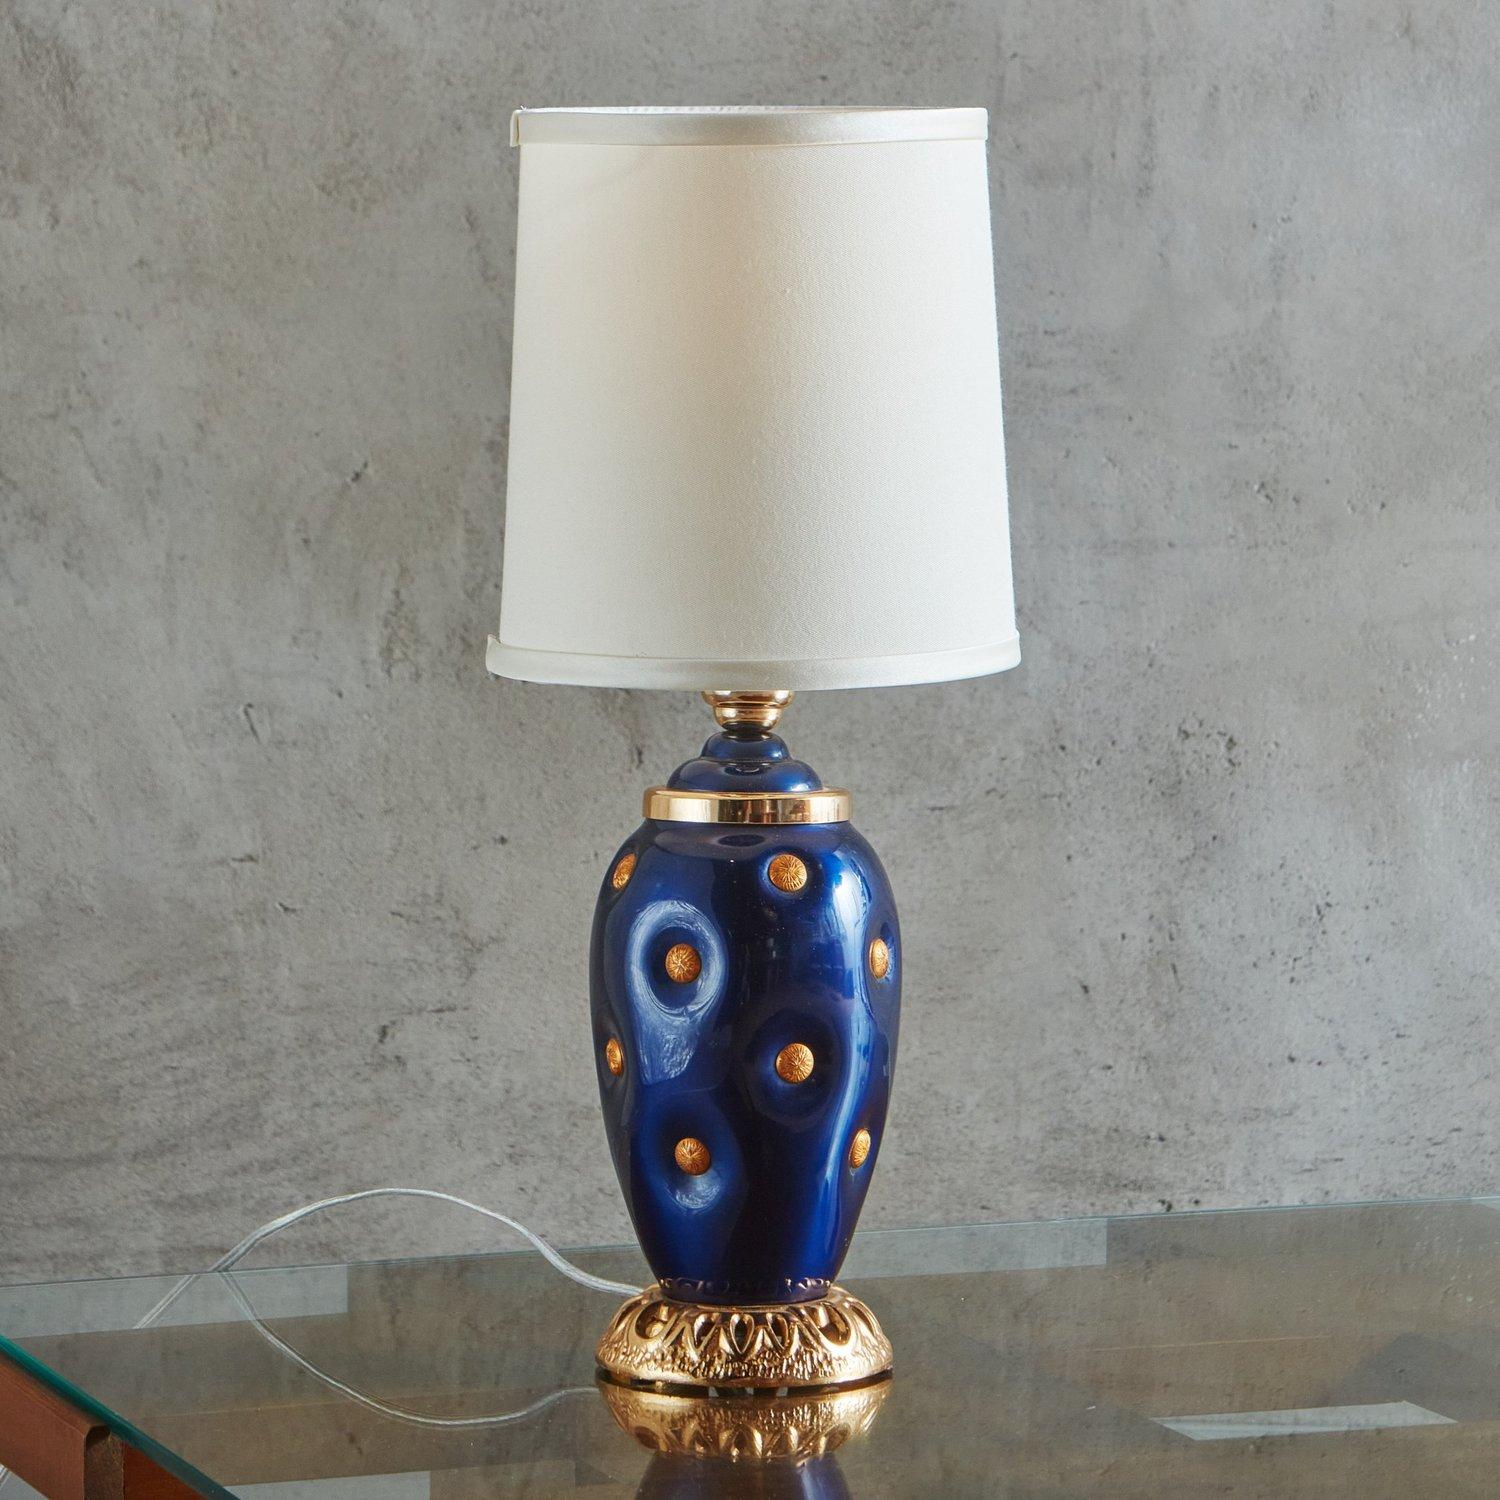 A vintage Italian table lamp with a striking royal blue glazed porcelain body and gold metal medallion detailing. It stands on an ornate gold metal base and has a new cream fabric shade. Unmarked. Sourced in Italy, 1980s. 

4.5”Dia x 14”H to Socket;